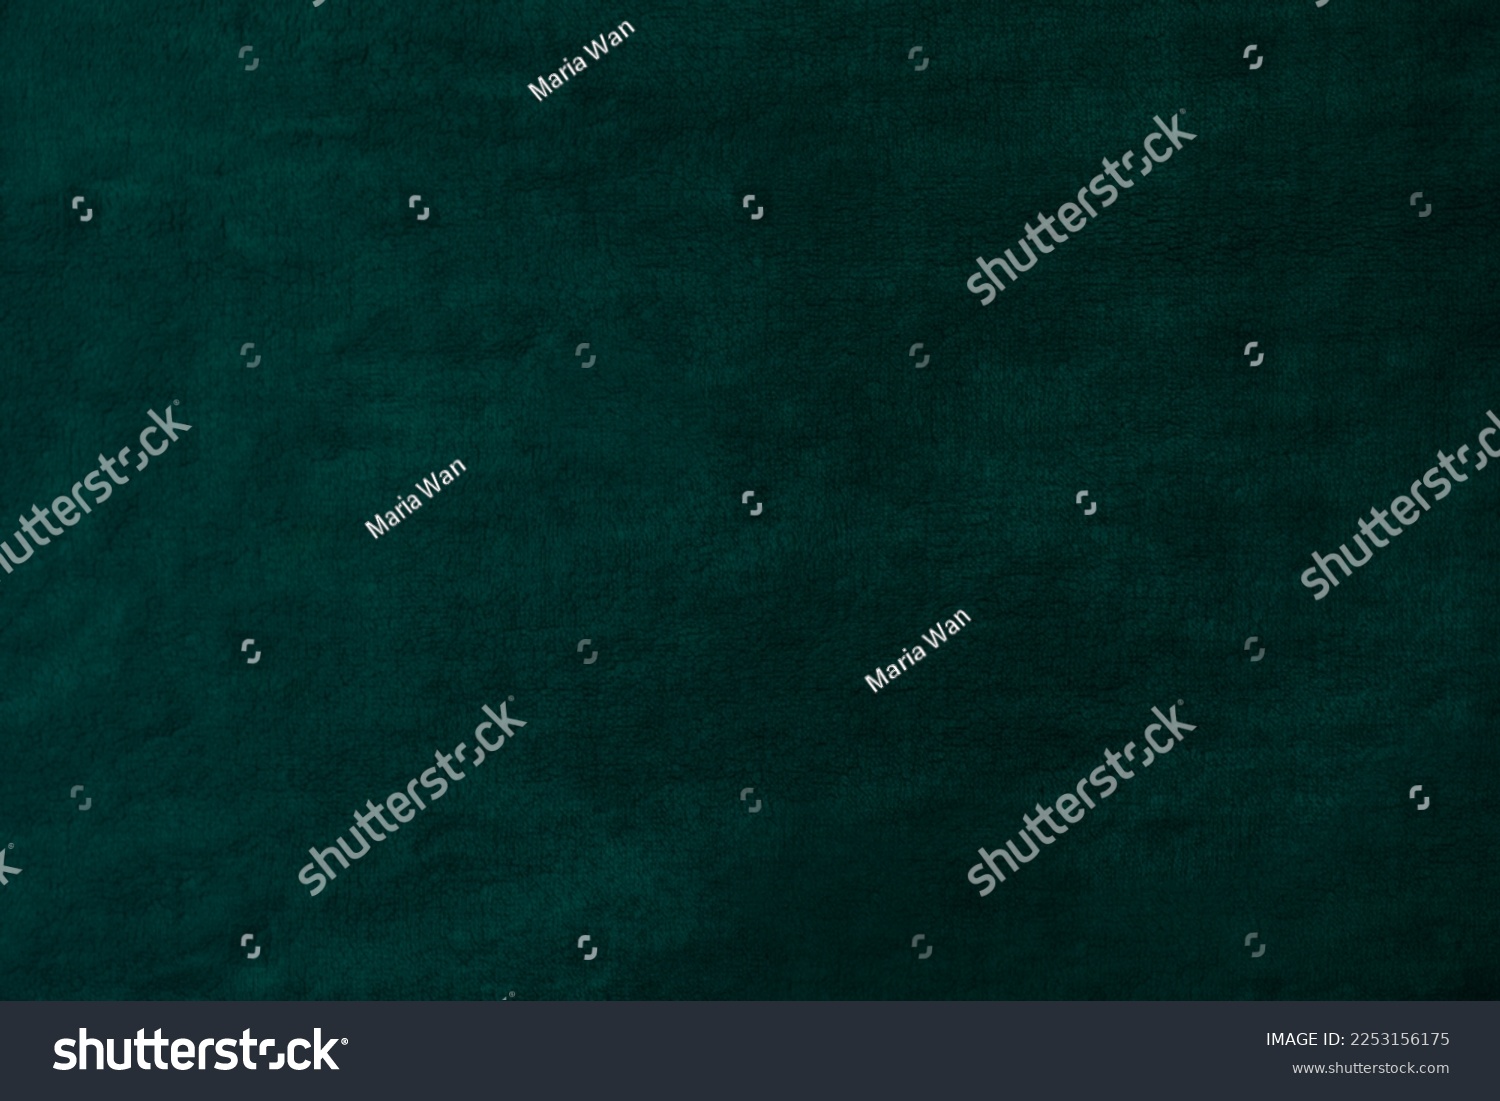 Bottle green velvet uneven background for design or photography backdrop. Malachite green uneven texture can be used as canvas or banner with space for logo or design. #2253156175